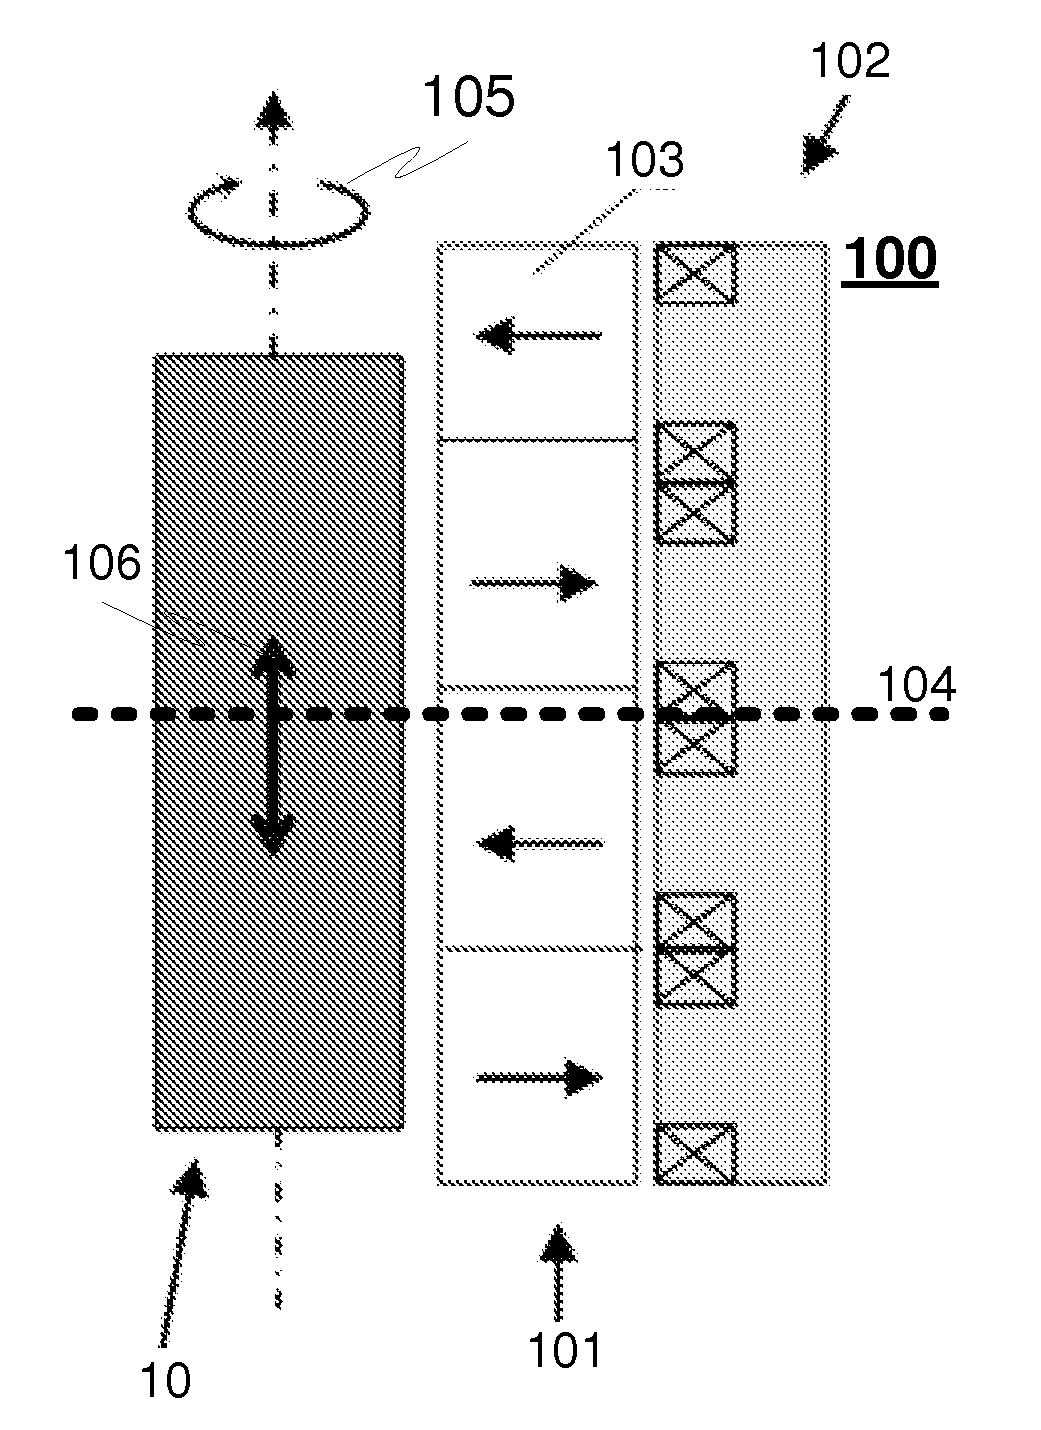 Method device and arrangement for heating an object by an induction